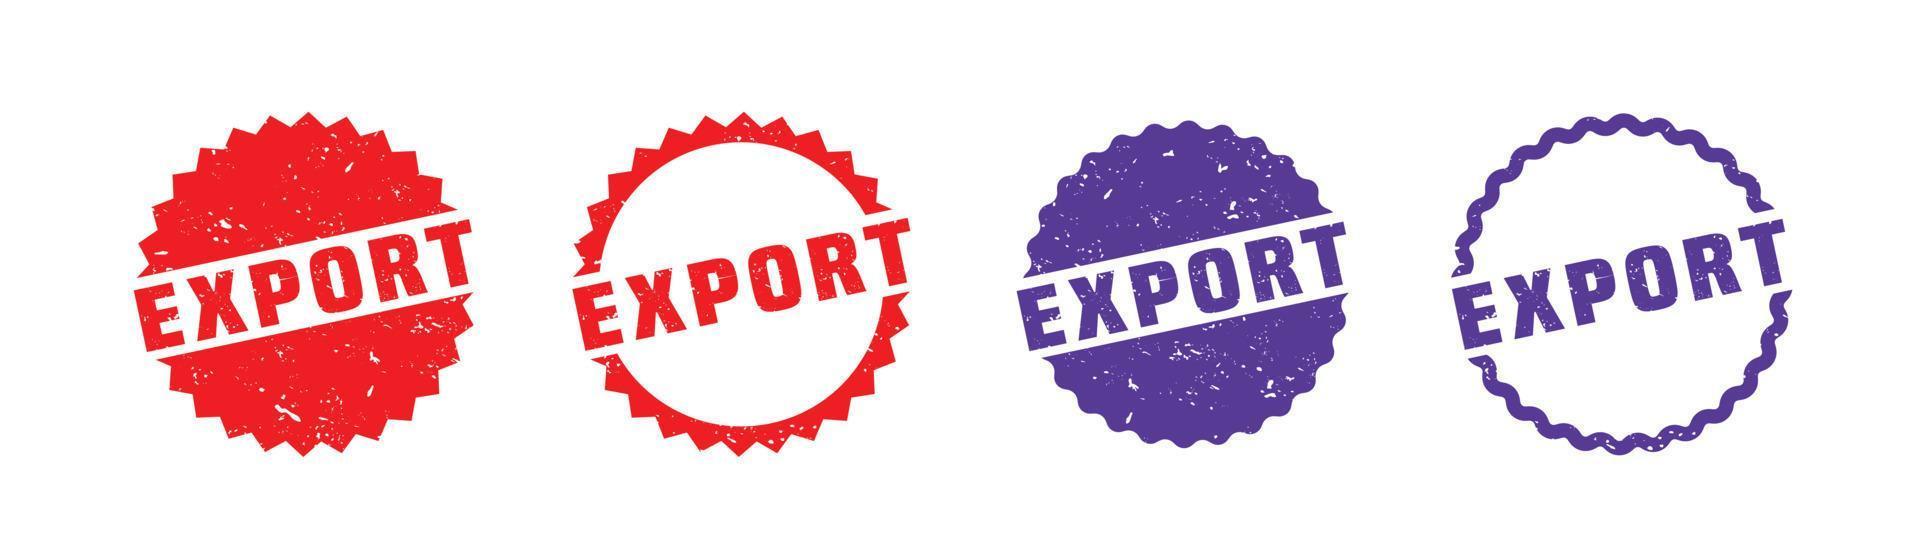 Export stamp rubber with grunge style on white background. vector